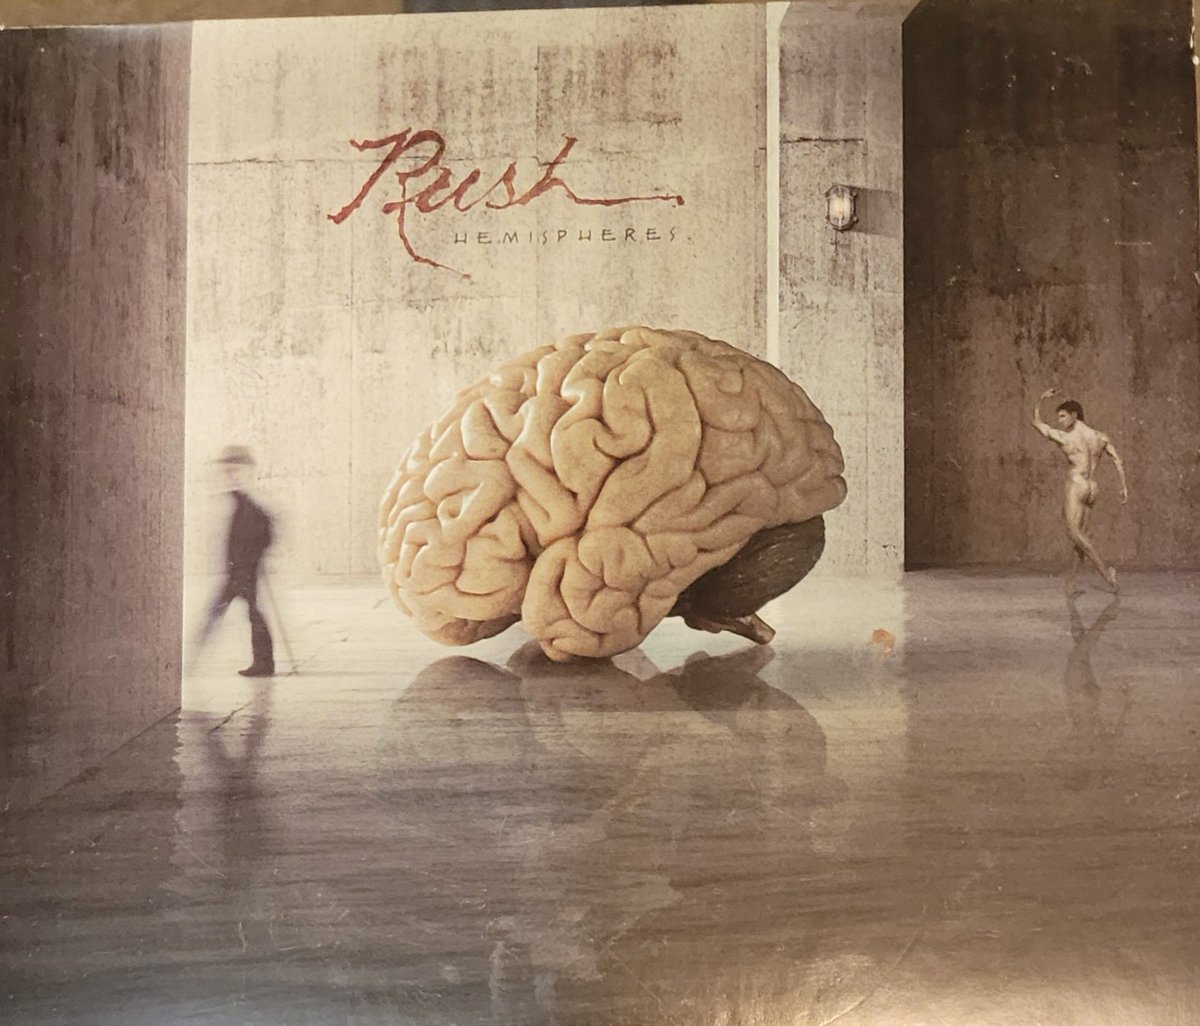 Right, I'm off to listen to Hemispheres for the 60 billionth time 🤣🤣🤘🤘🤘 #rush